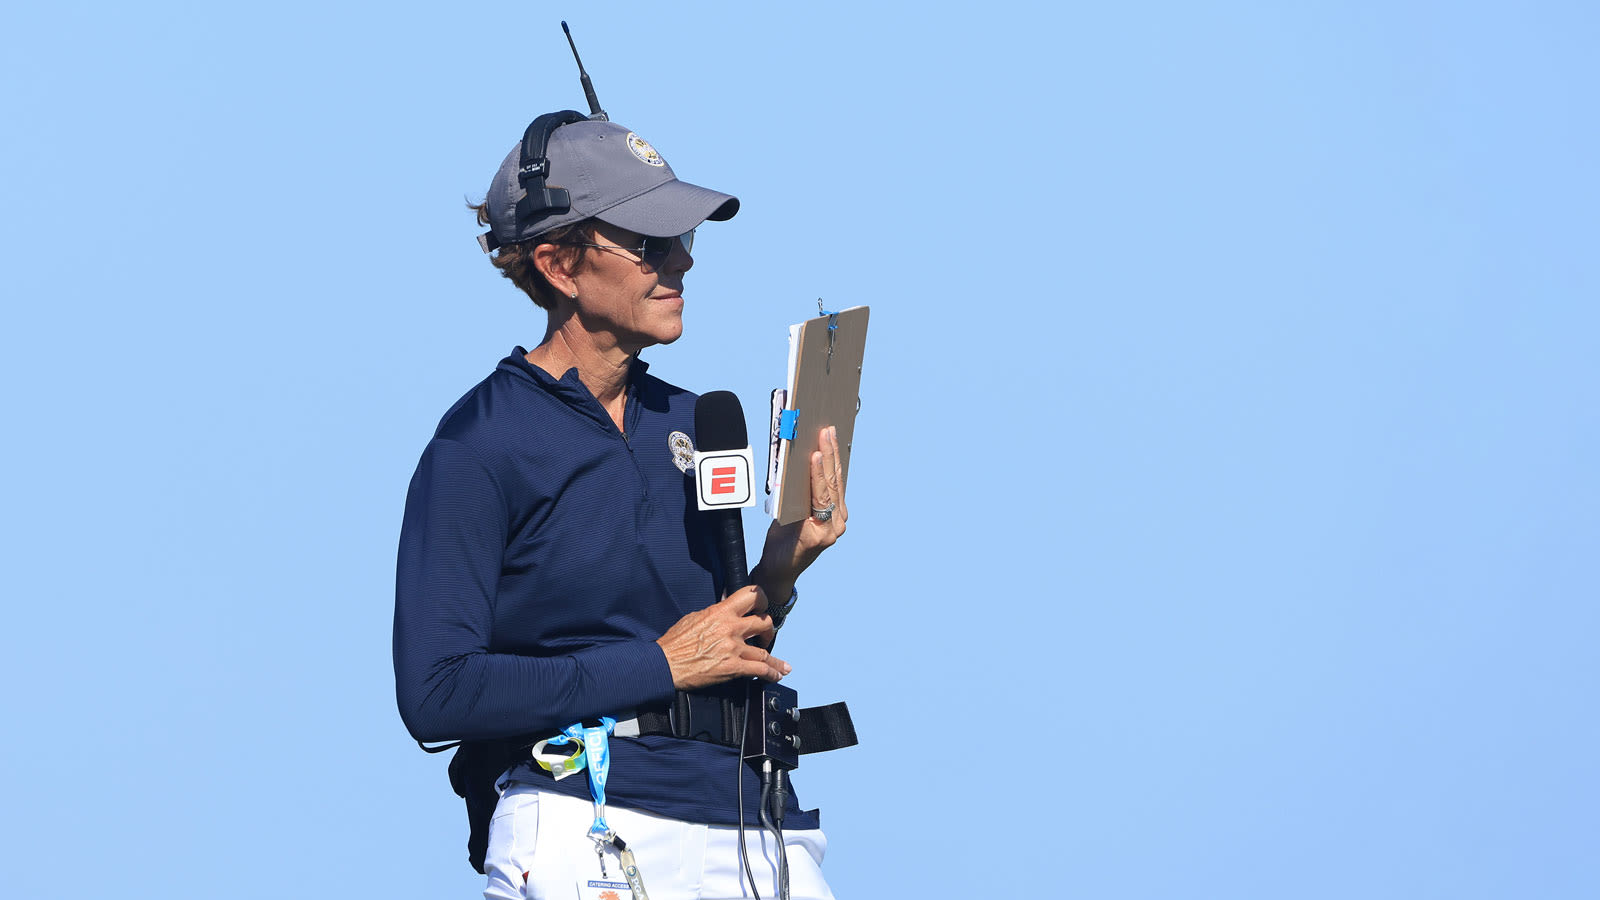 Suzy Whaley reports during the first round of the 2021 PGA Championship. (Photo by Sam Greenwood/Getty Images)